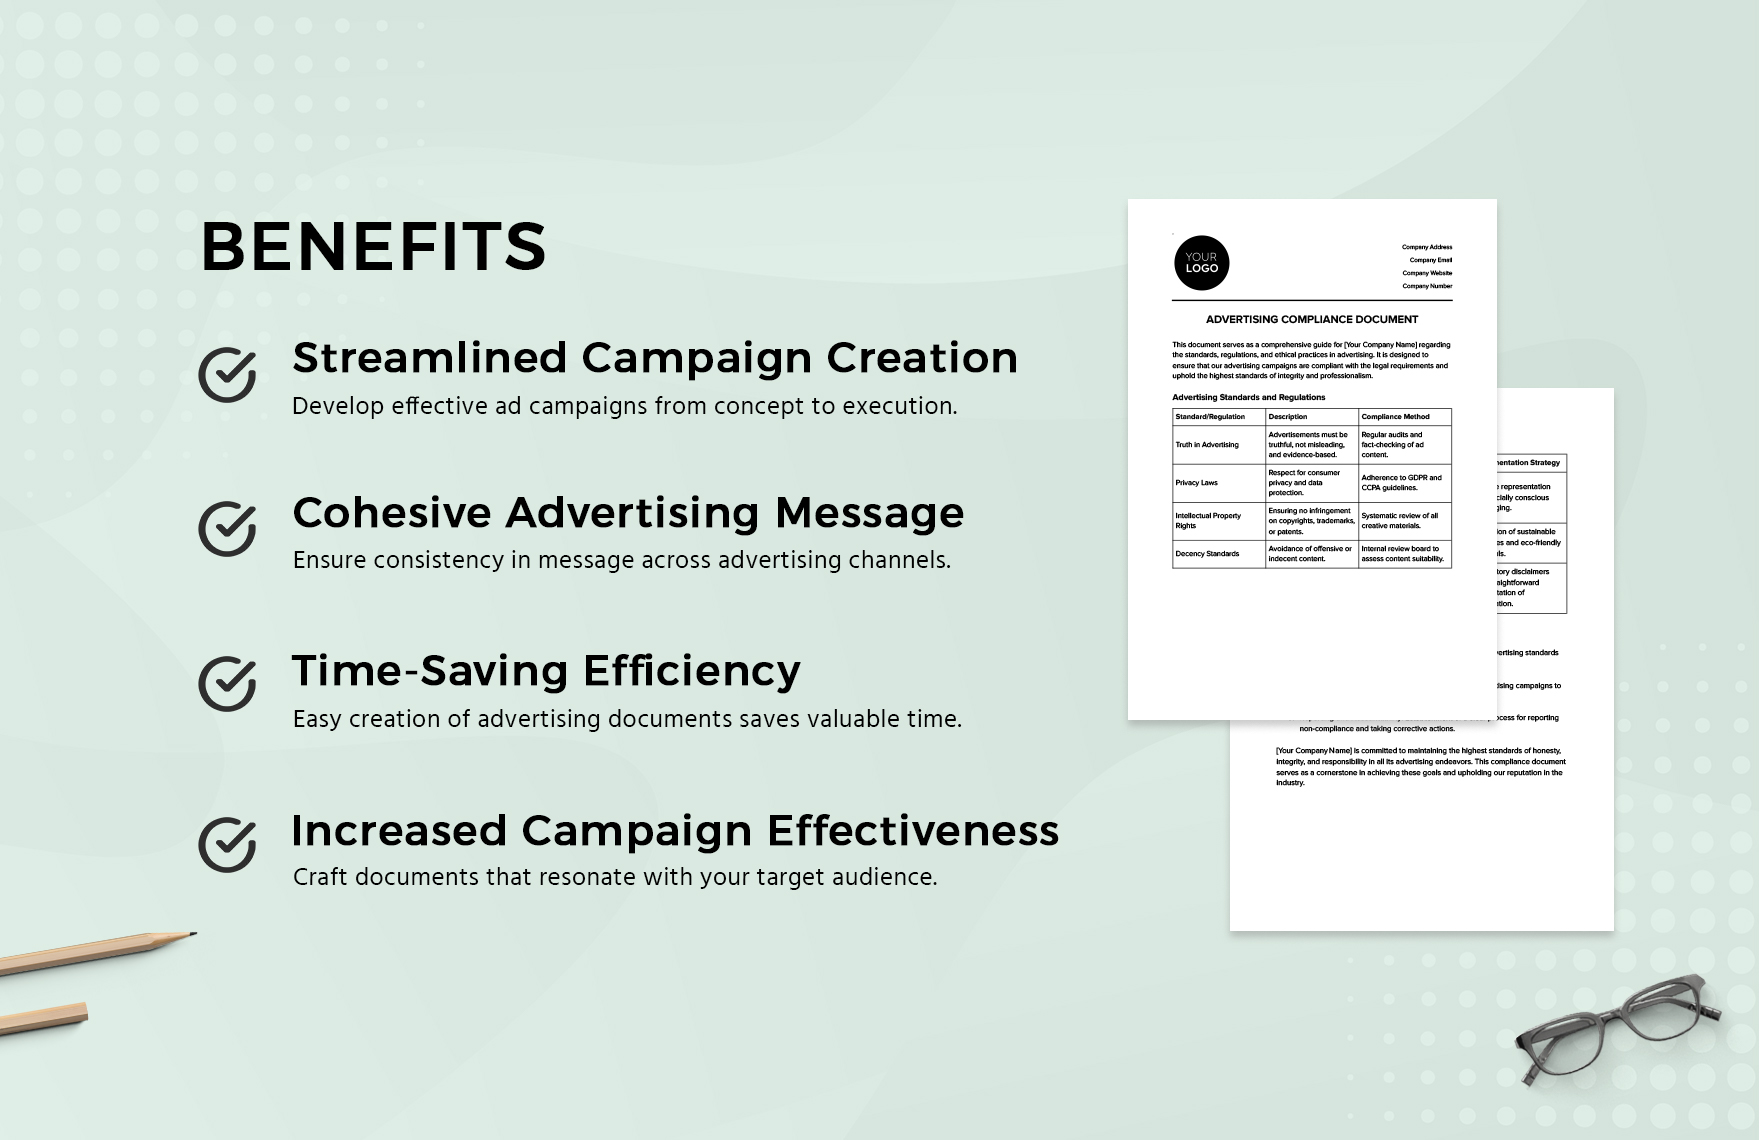 Advertising Compliance Document Template